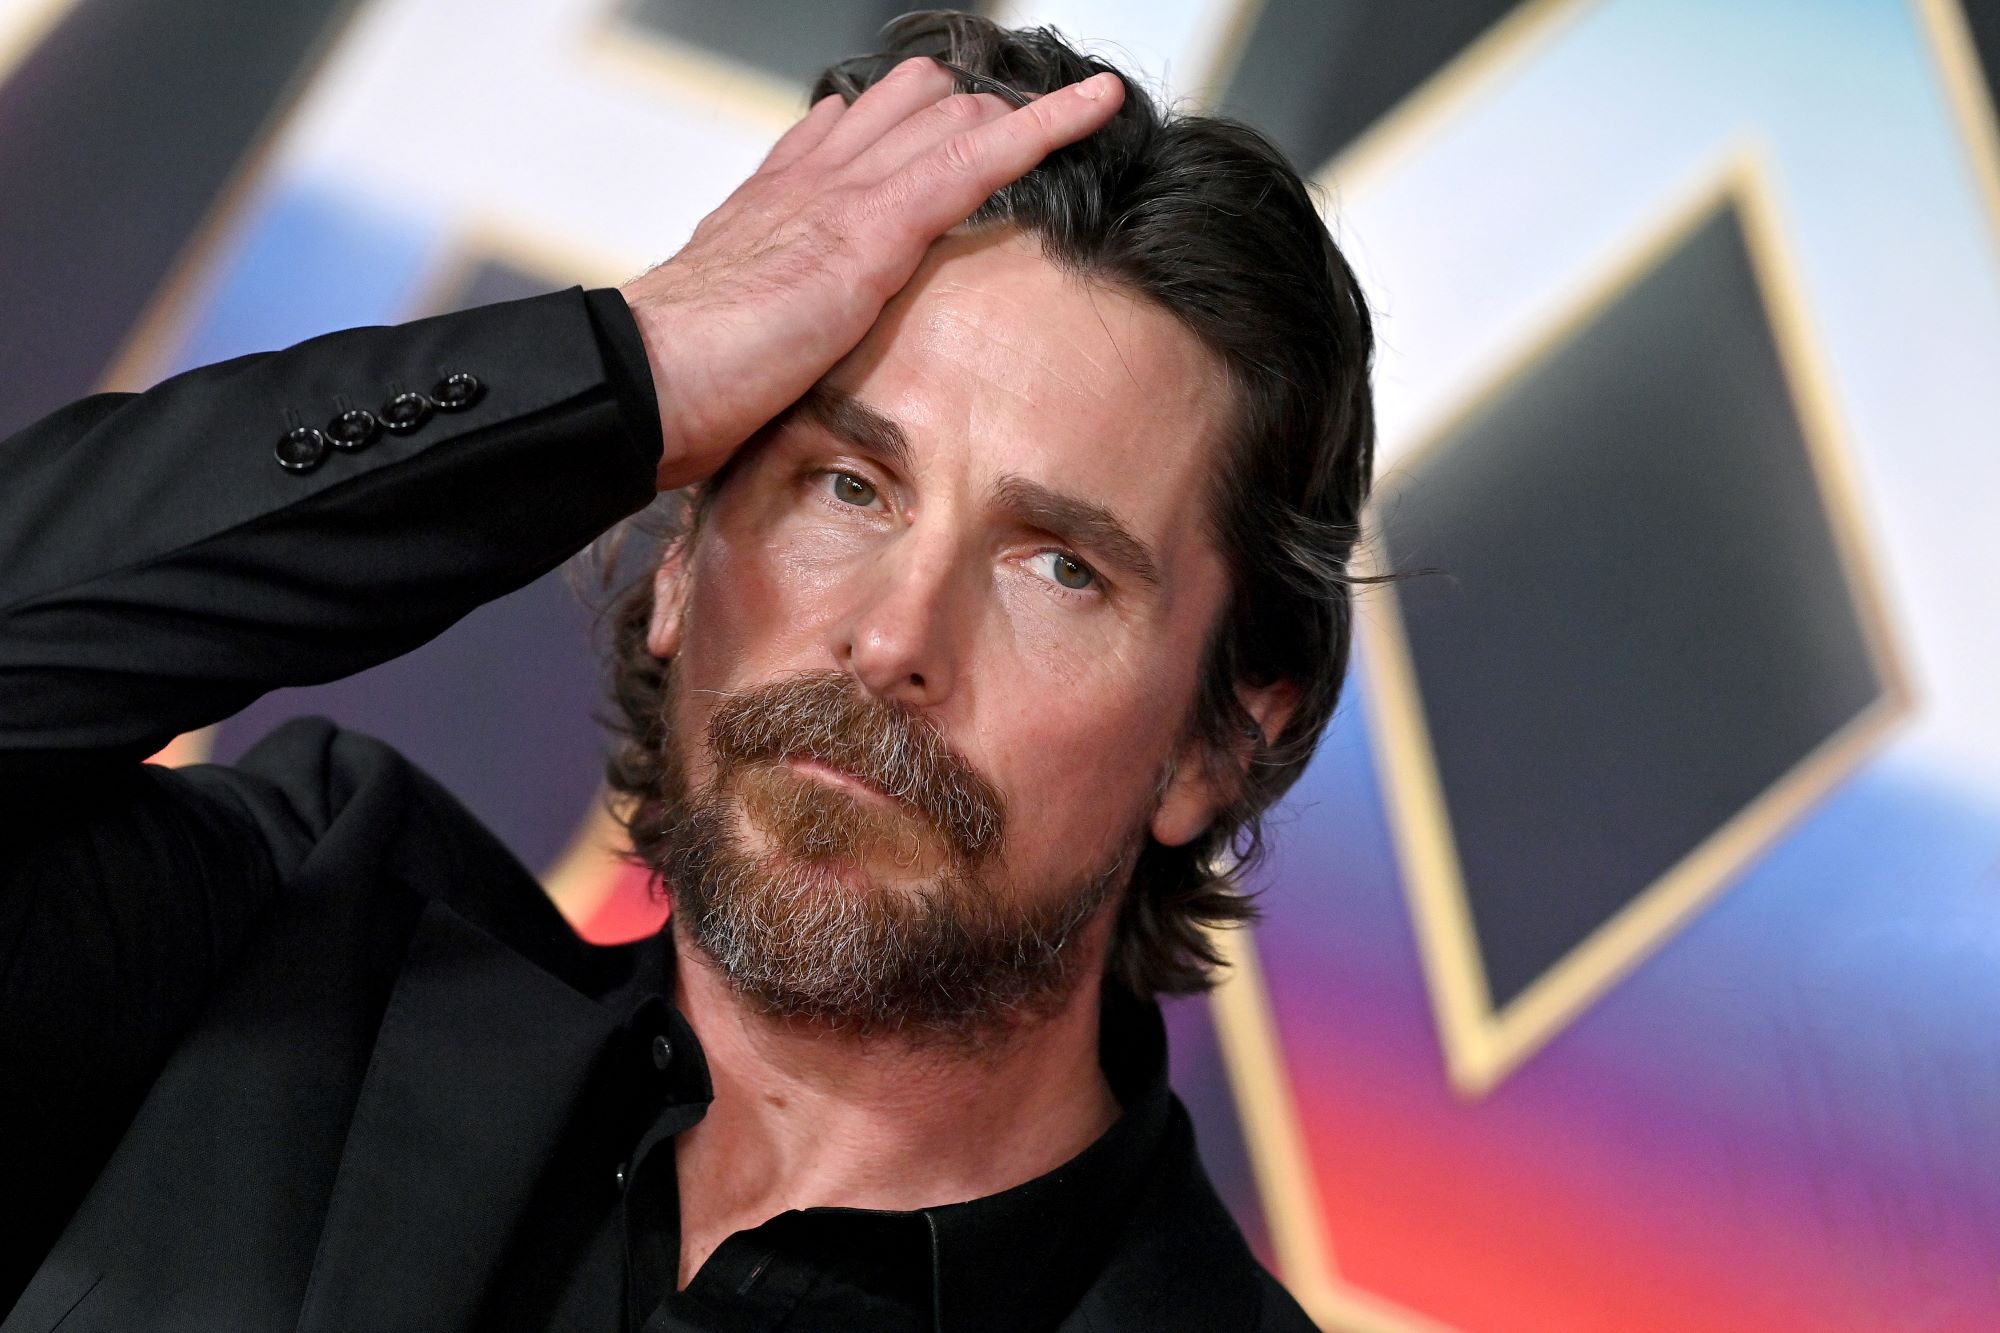 Christian Bale, who stars in 'Thor: Love and Thunder,' wears a black suit